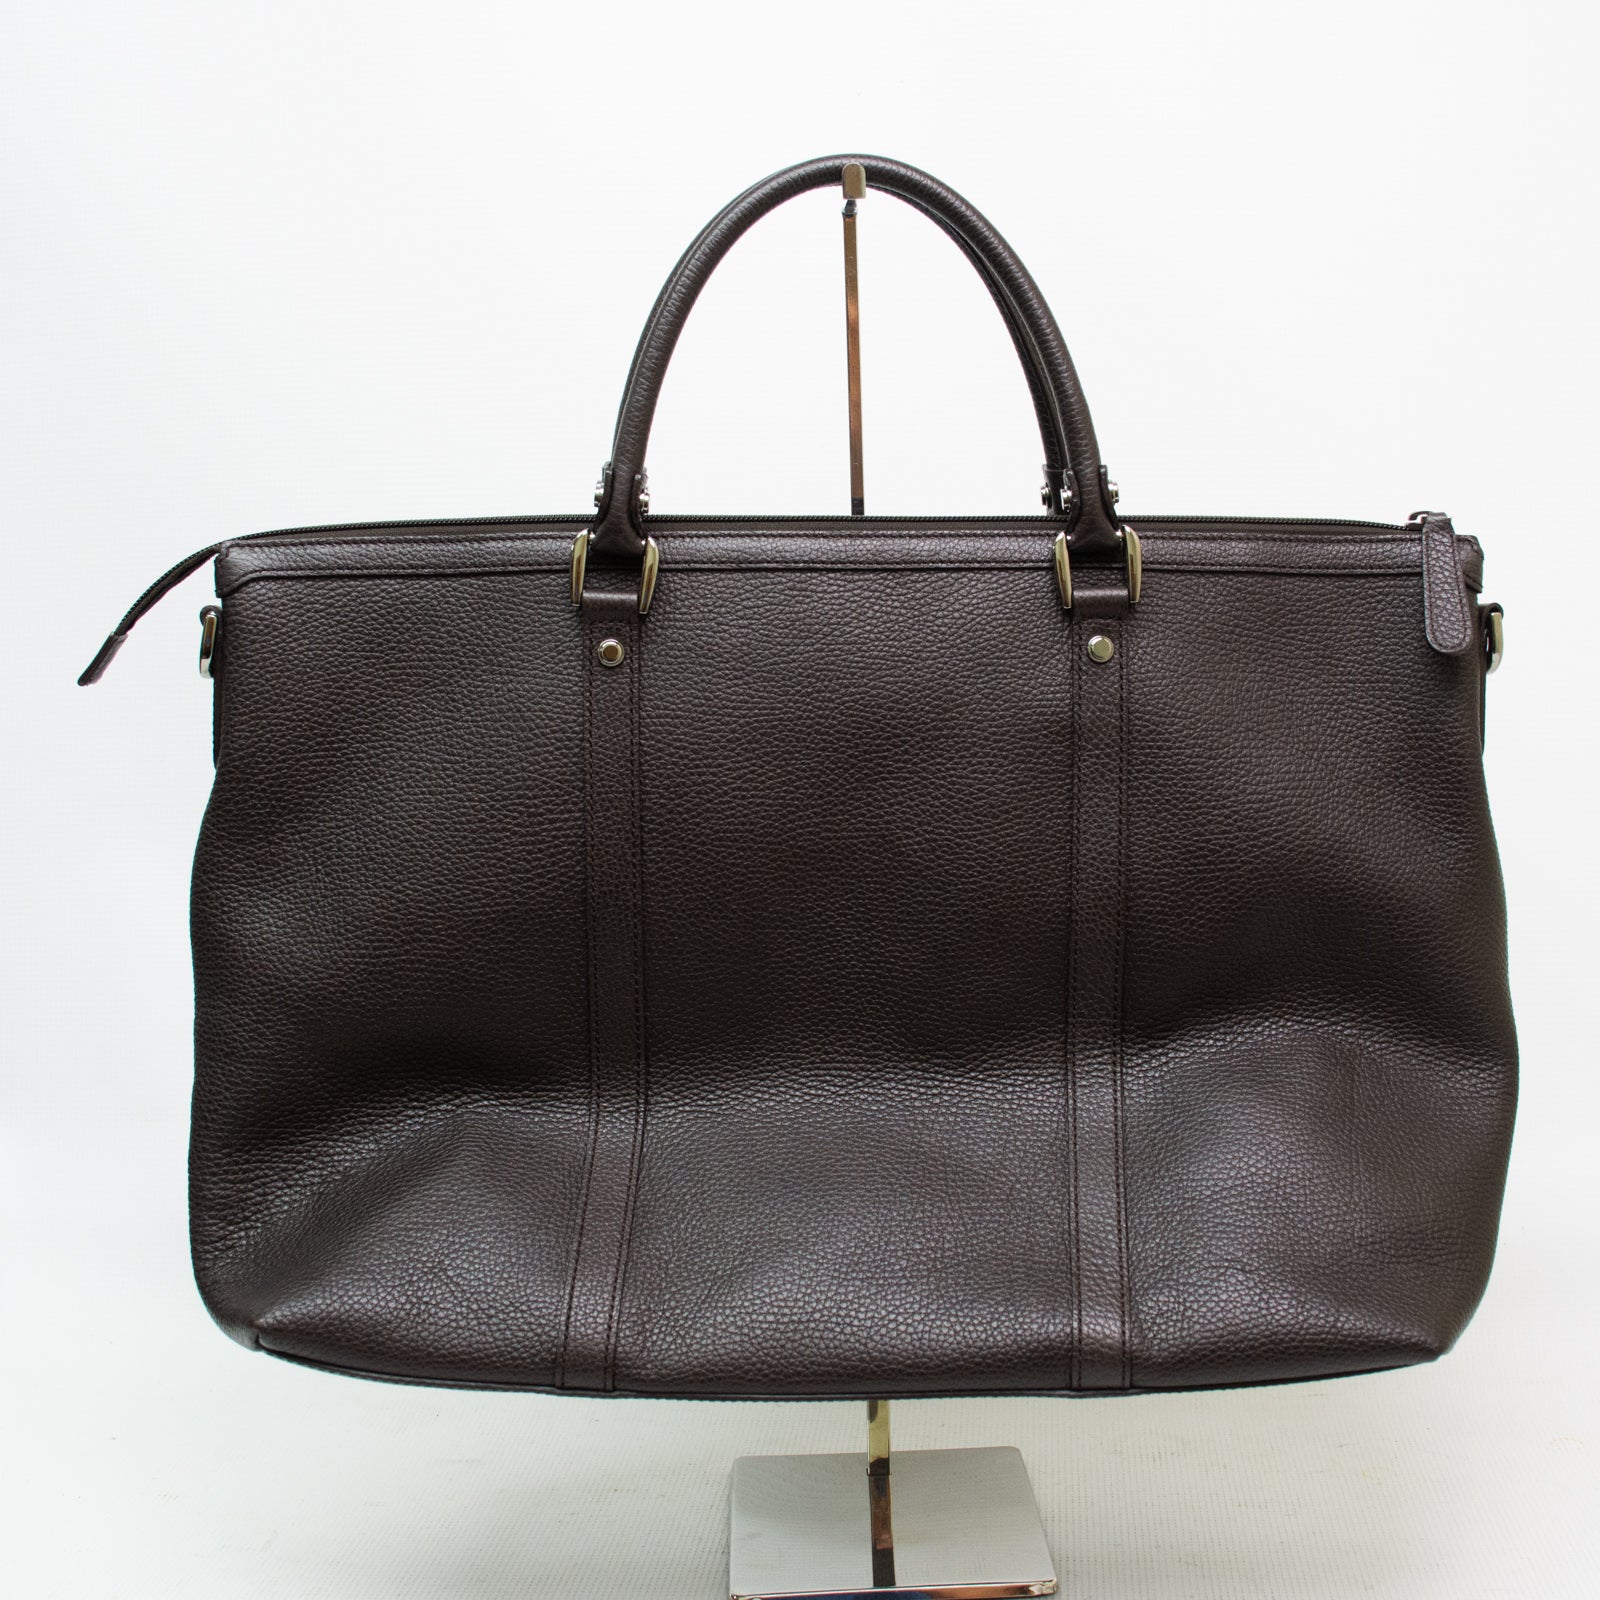 Gucci 339550 Large Tote - Dark Brown Leather